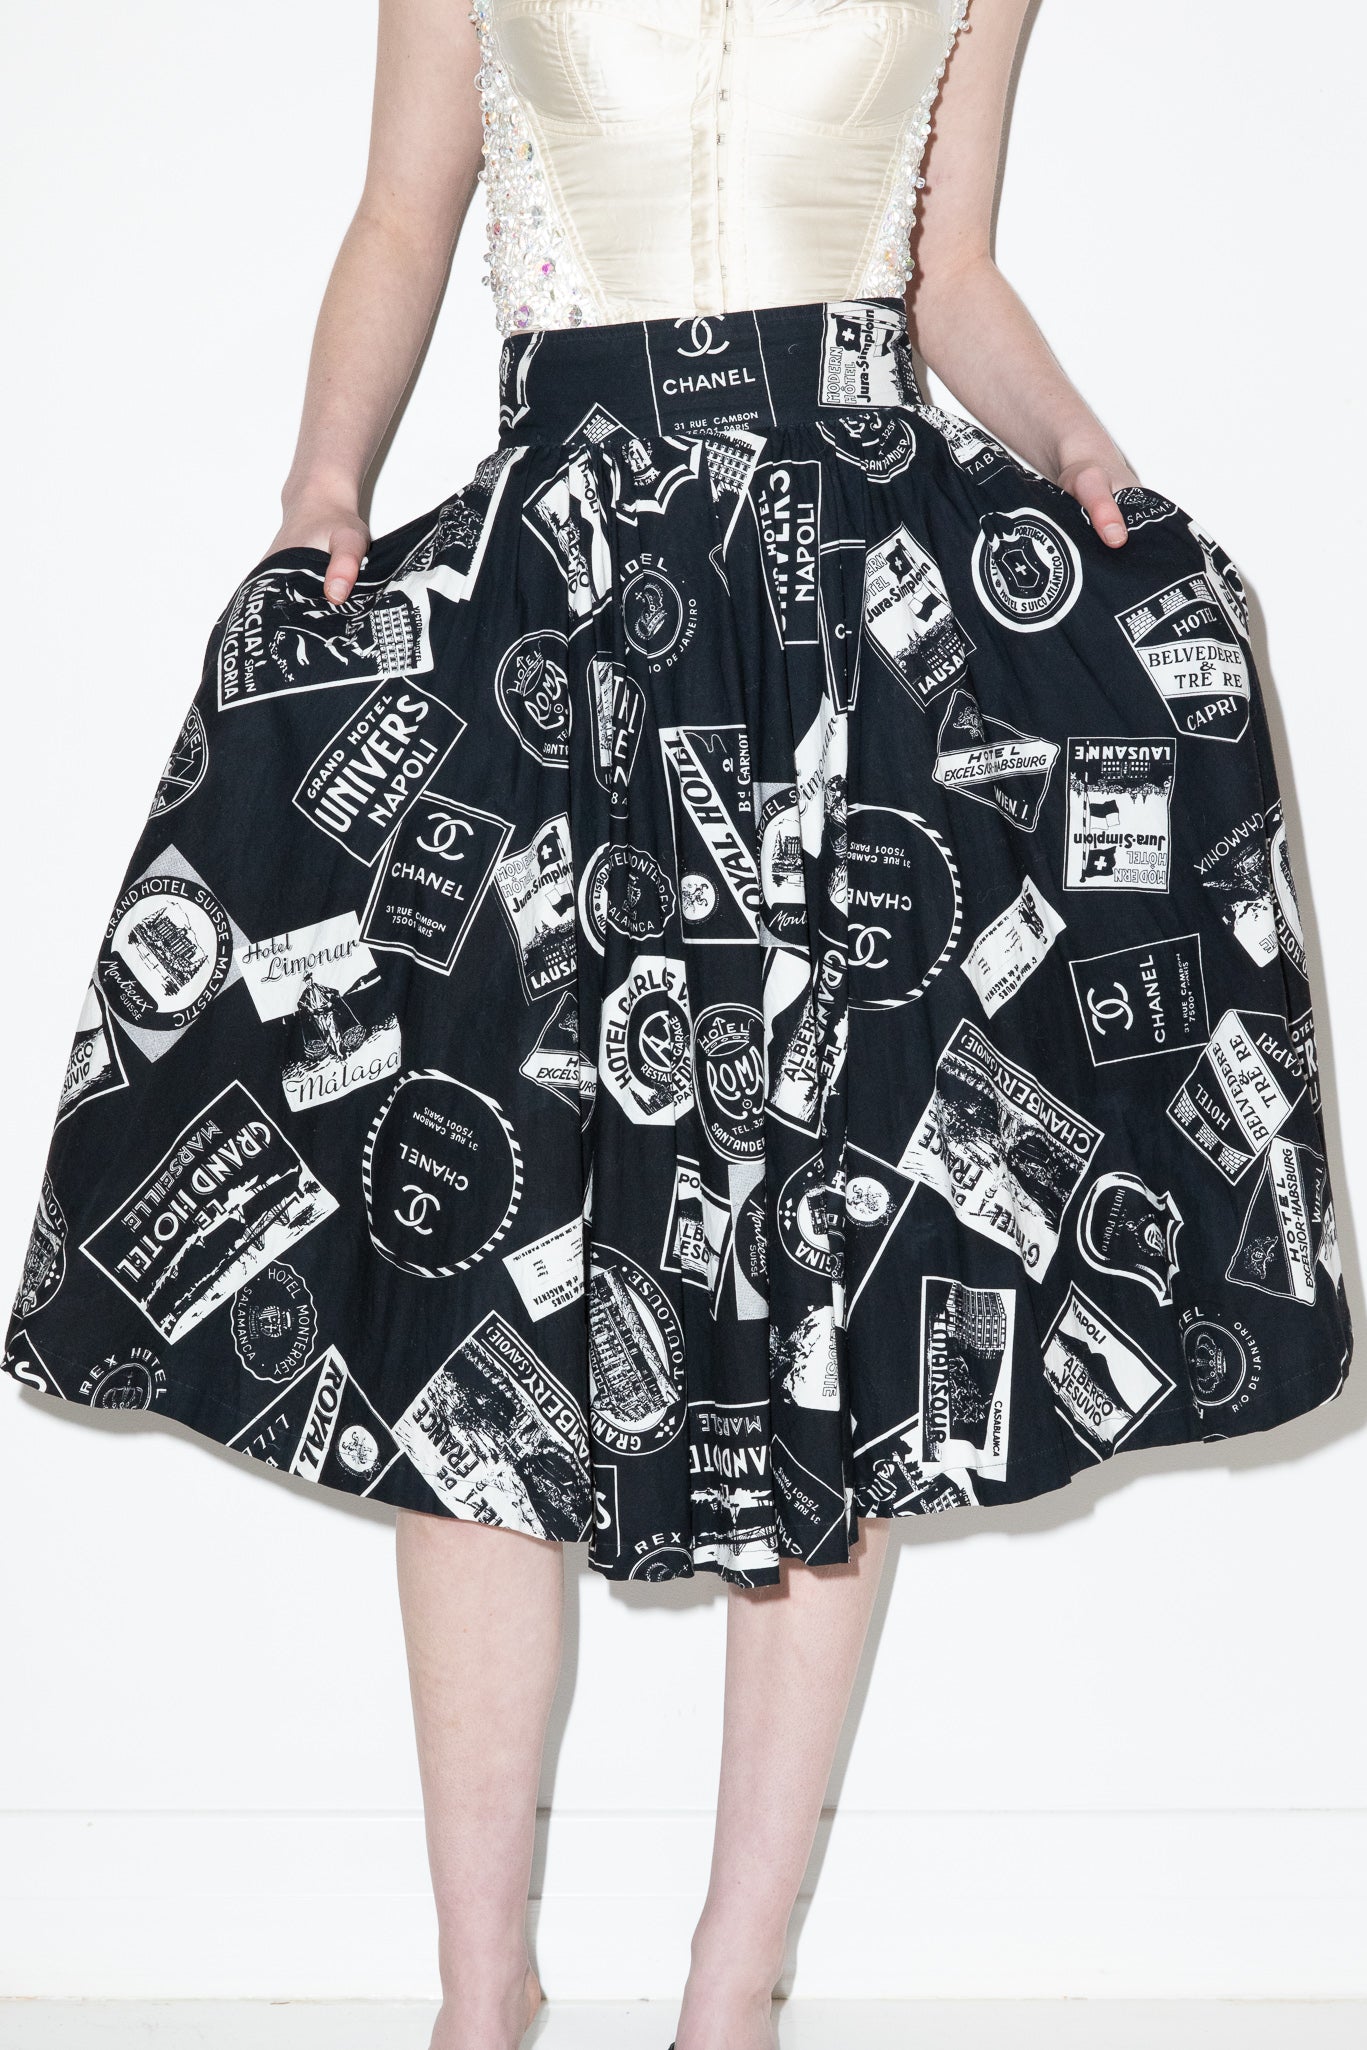 Chanel <br> S/S 1989 campaign runway Grand Hotel print full skirt